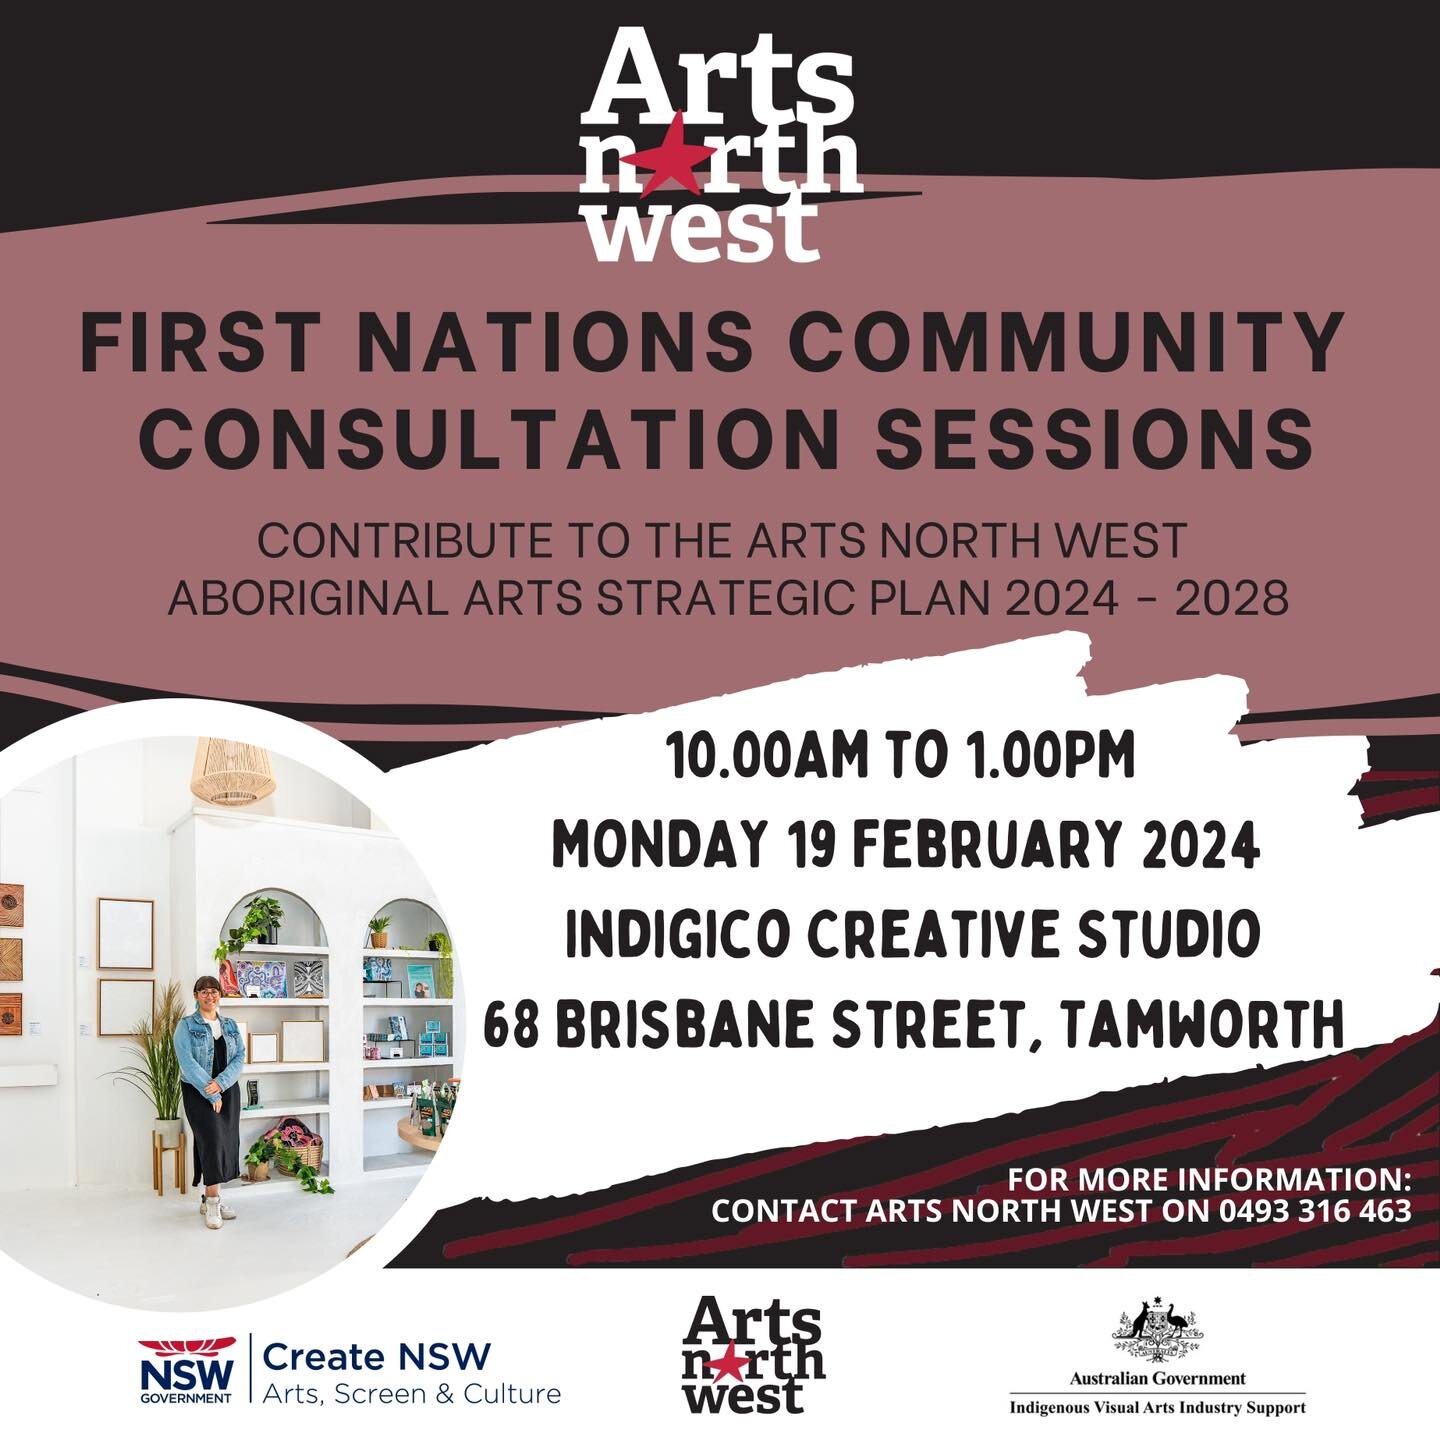 Indigico Creative Studio is delighted to be hosting a Community Consultation session with Arts North West this coming Monday 19th February from 10am-1pm. 

Arts North West is working on their 2024-2028 Aboriginal Arts Strategic Plan and they want to 